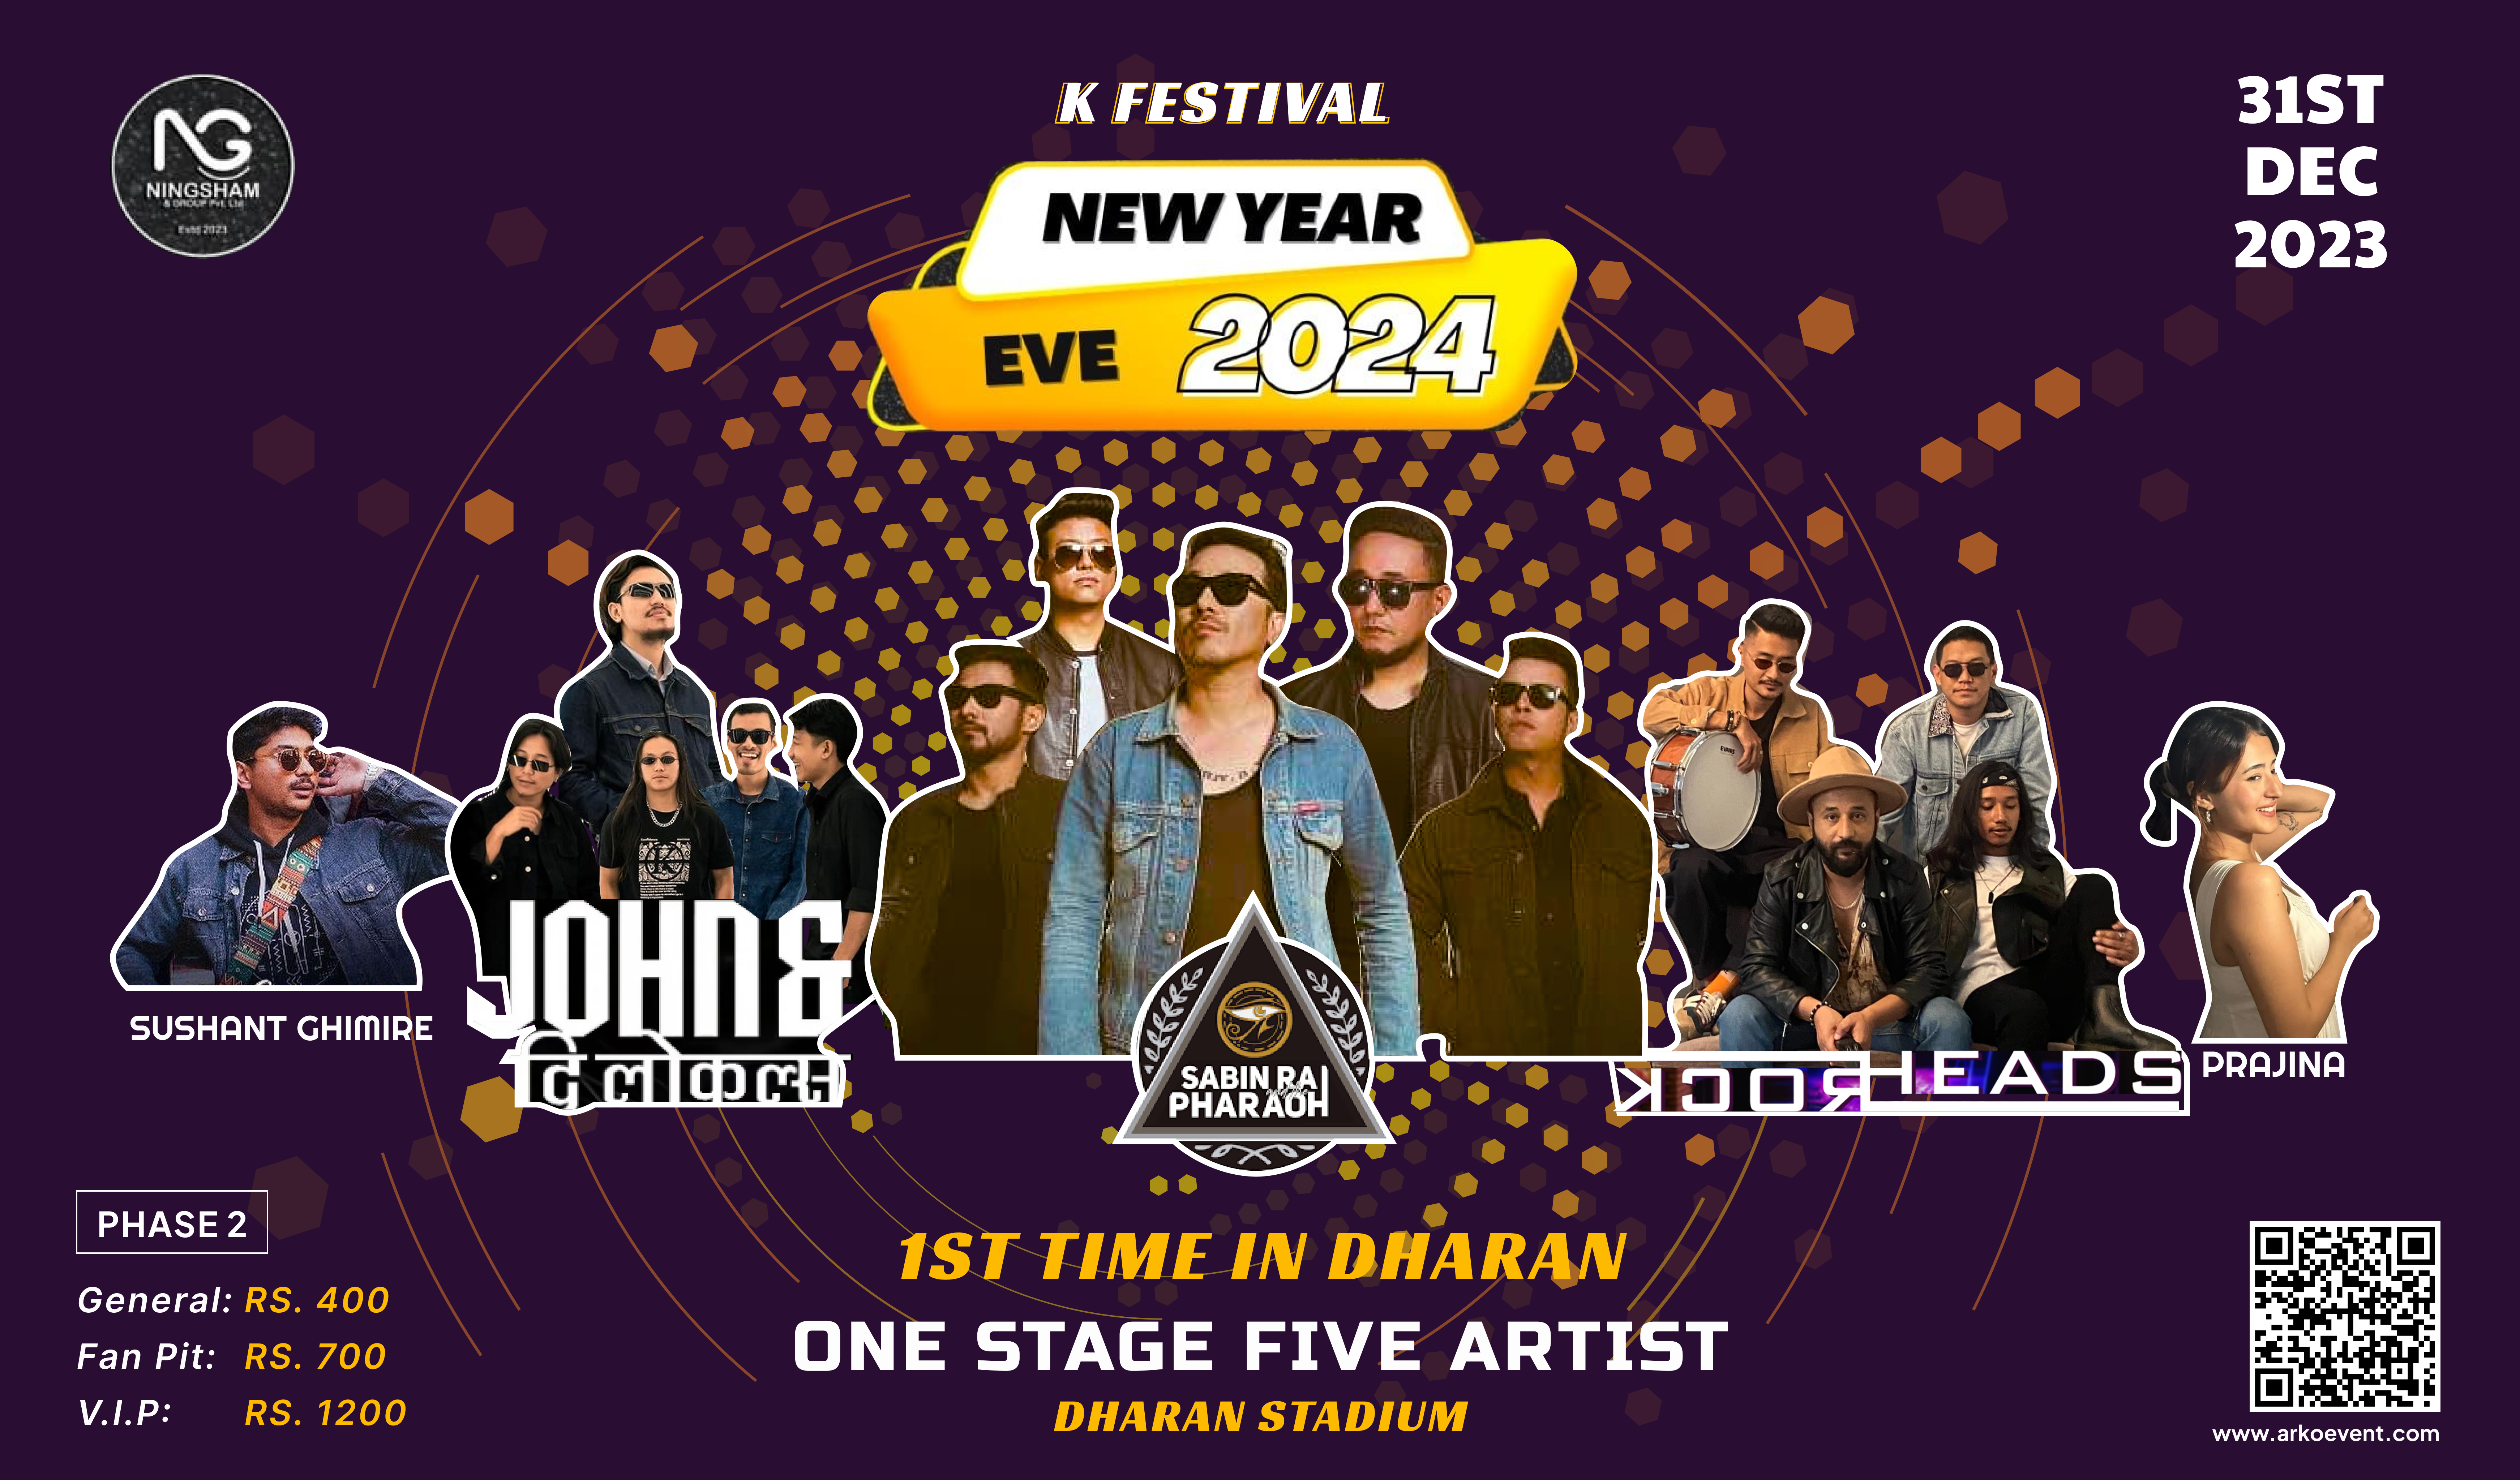 K Festival at Dharan on New Year’s Eve